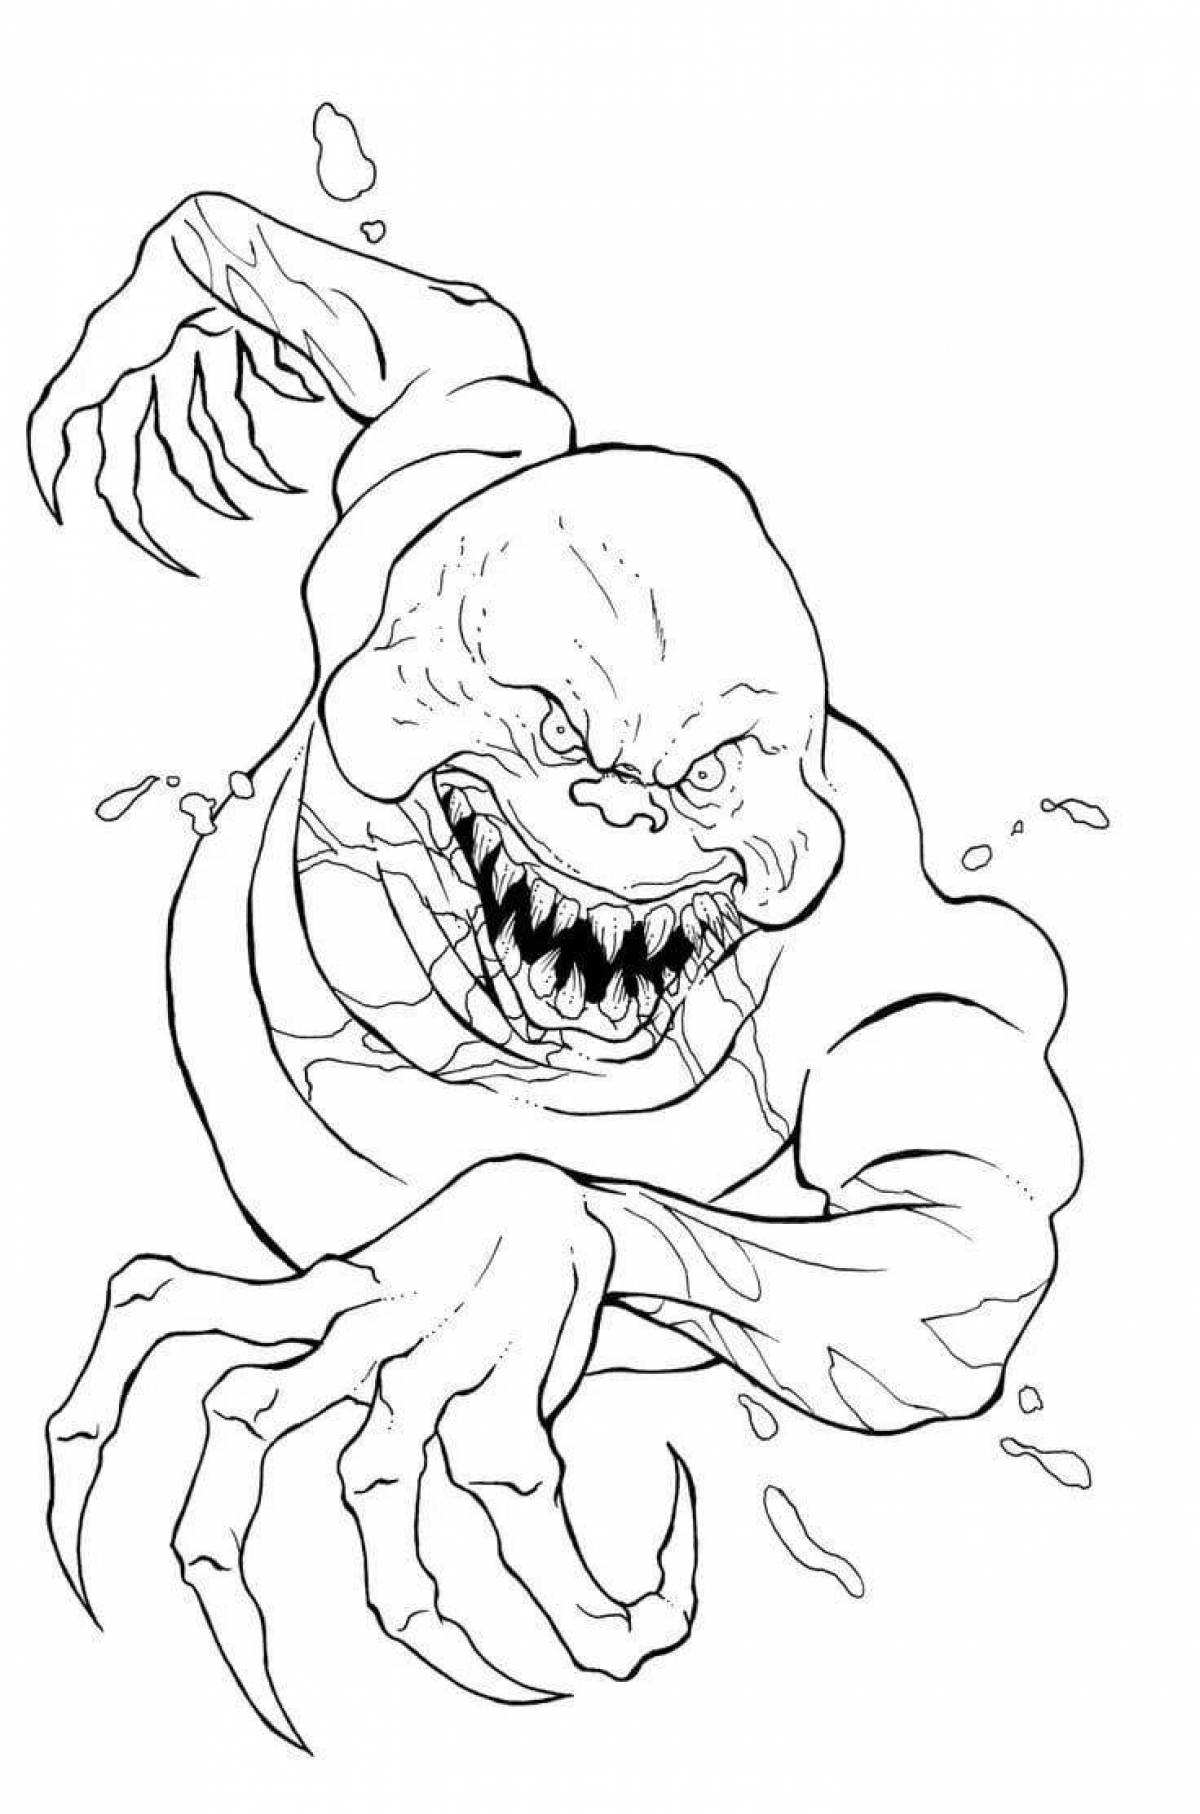 Chilling horror coloring pages for kids